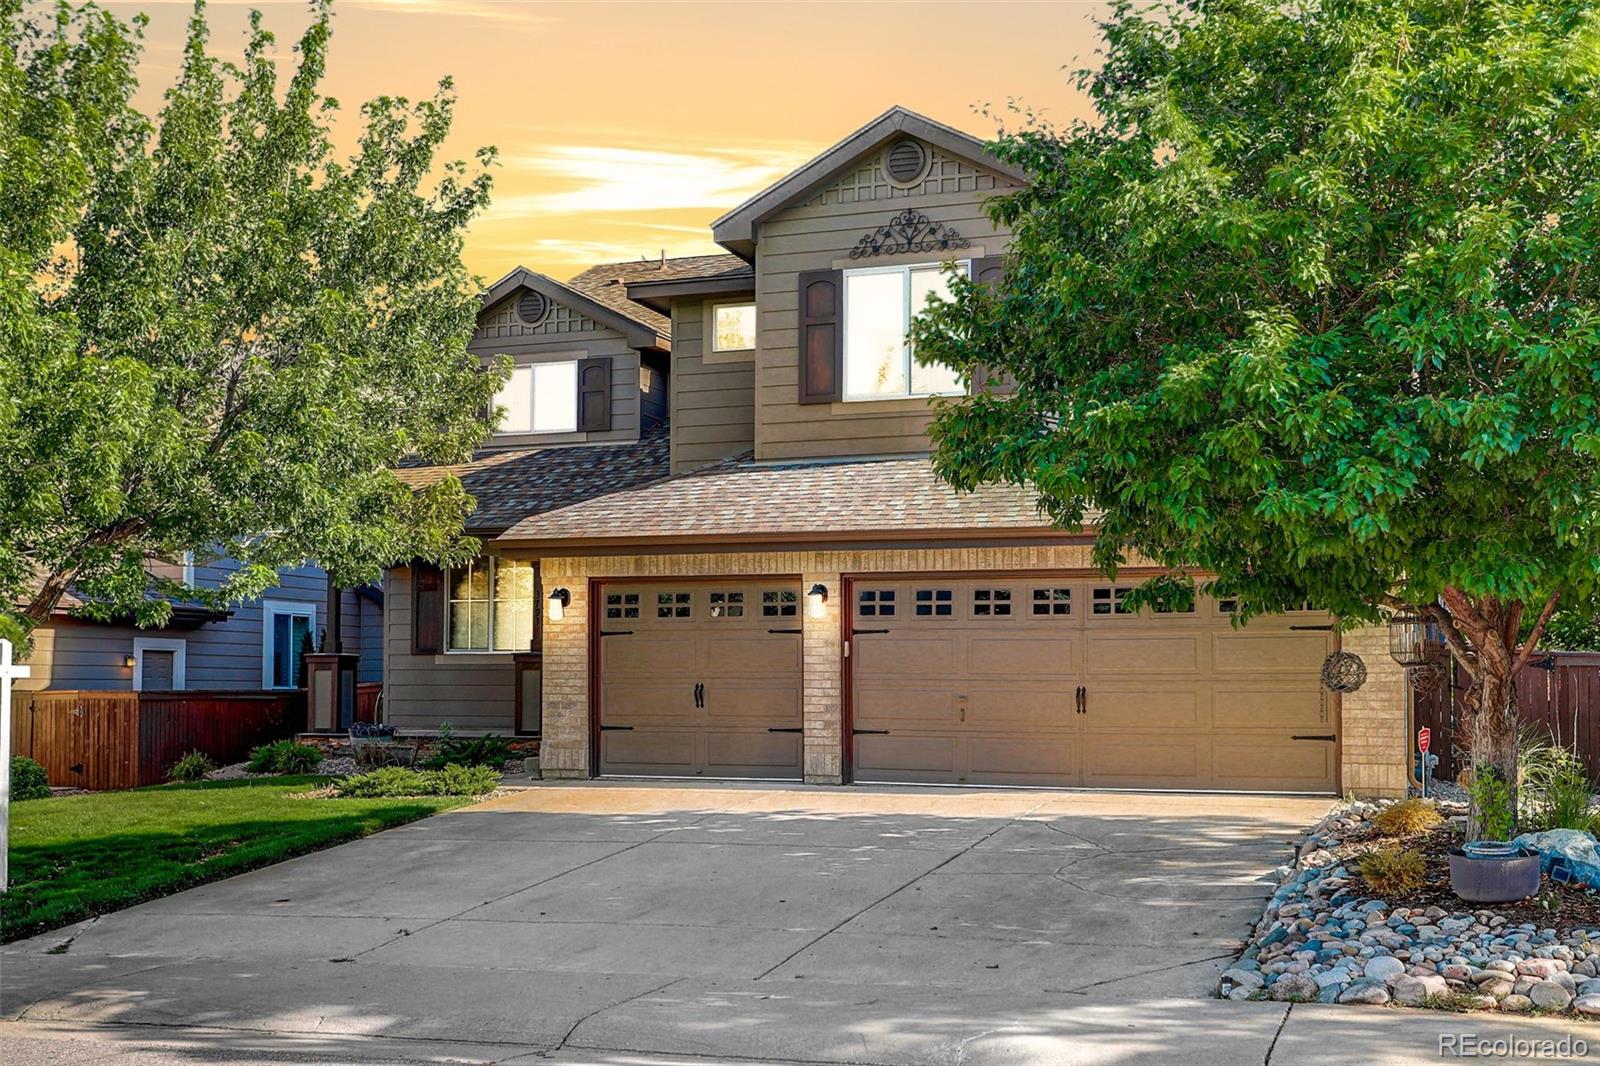 Report Image for 3791  Charterwood Circle,Highlands Ranch, Colorado